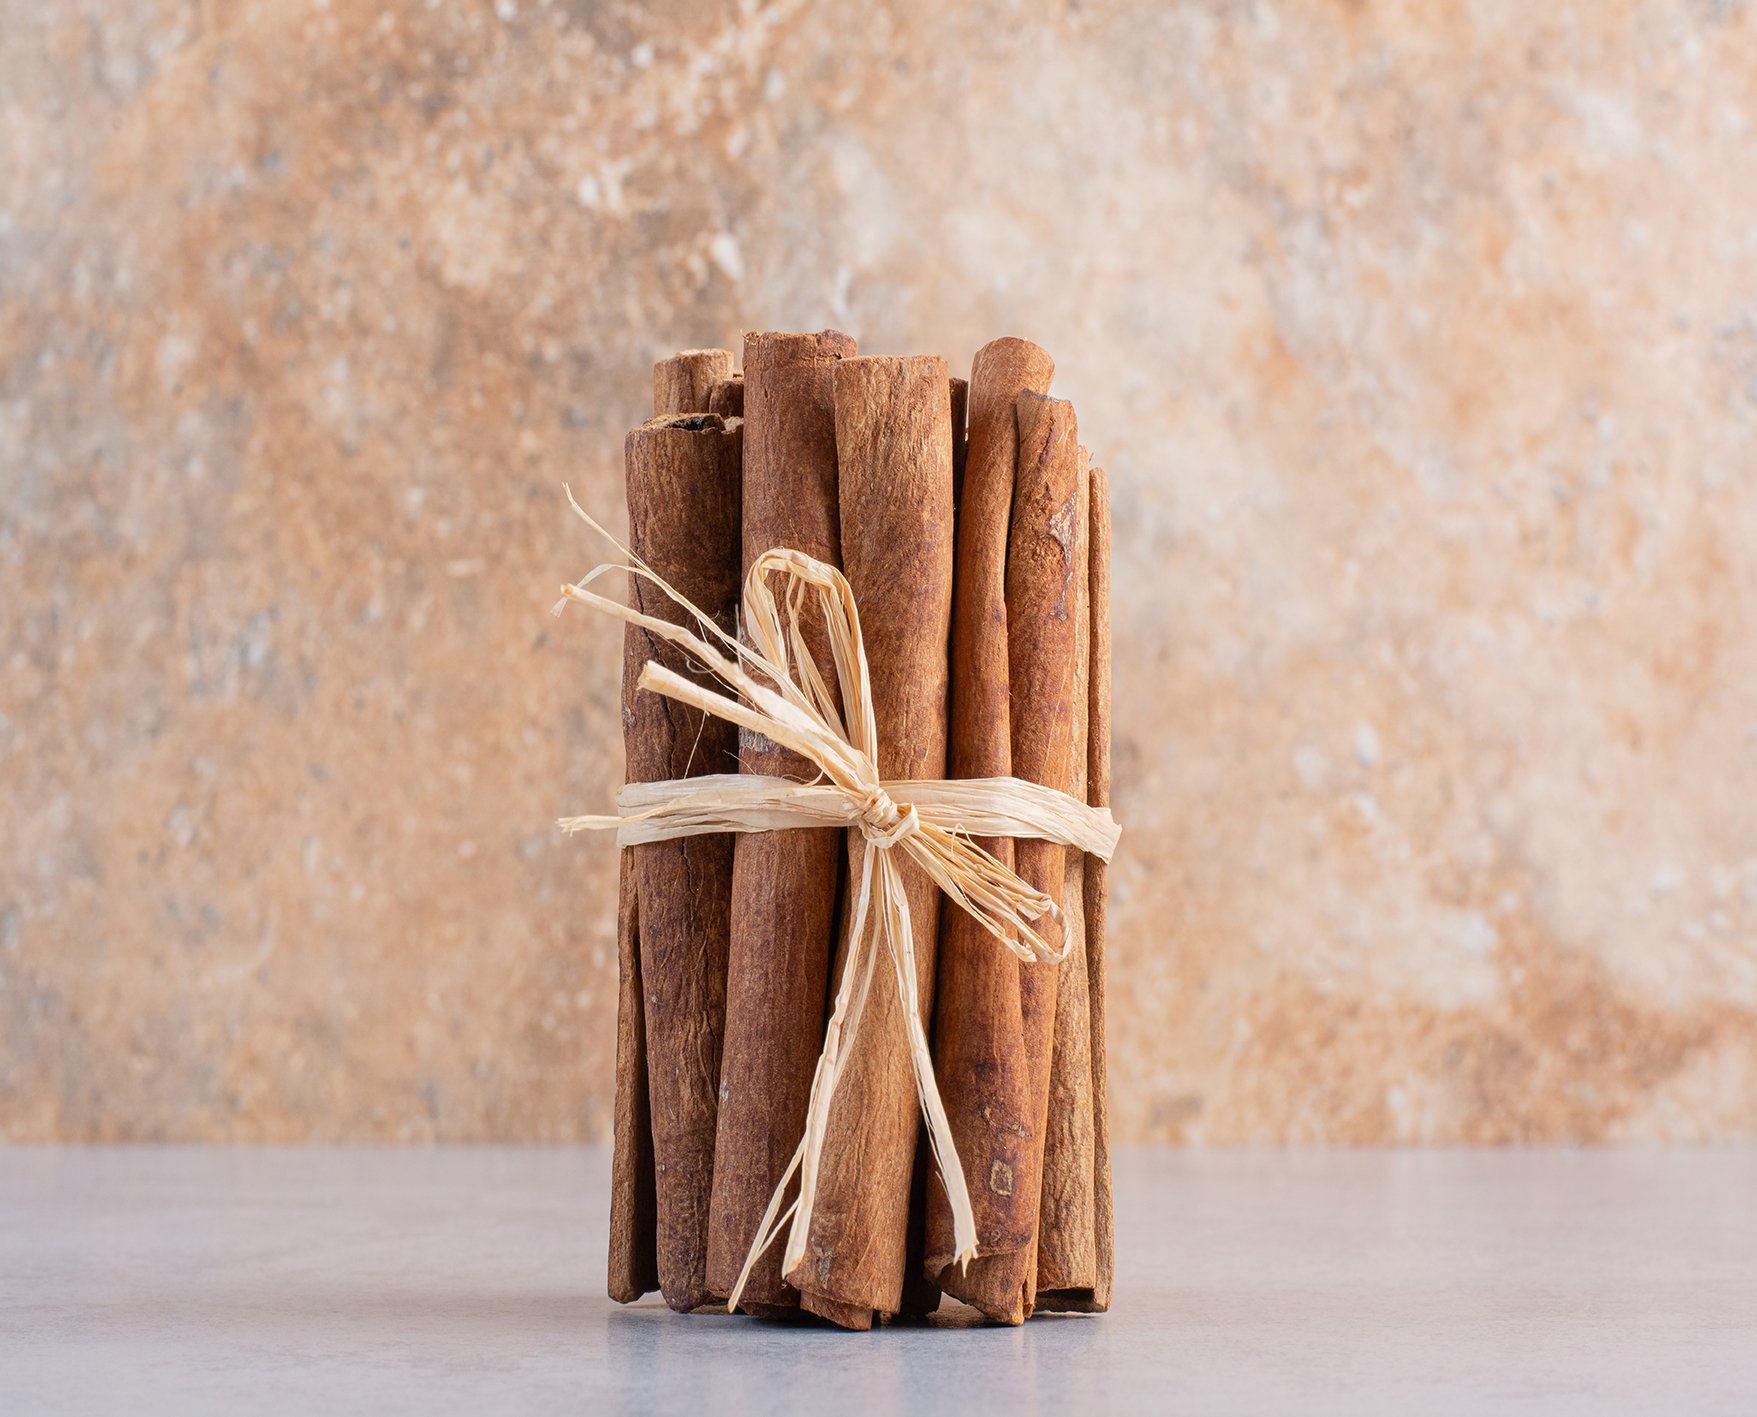 Cinnamon sticks isolated on concrete background. High quality photo